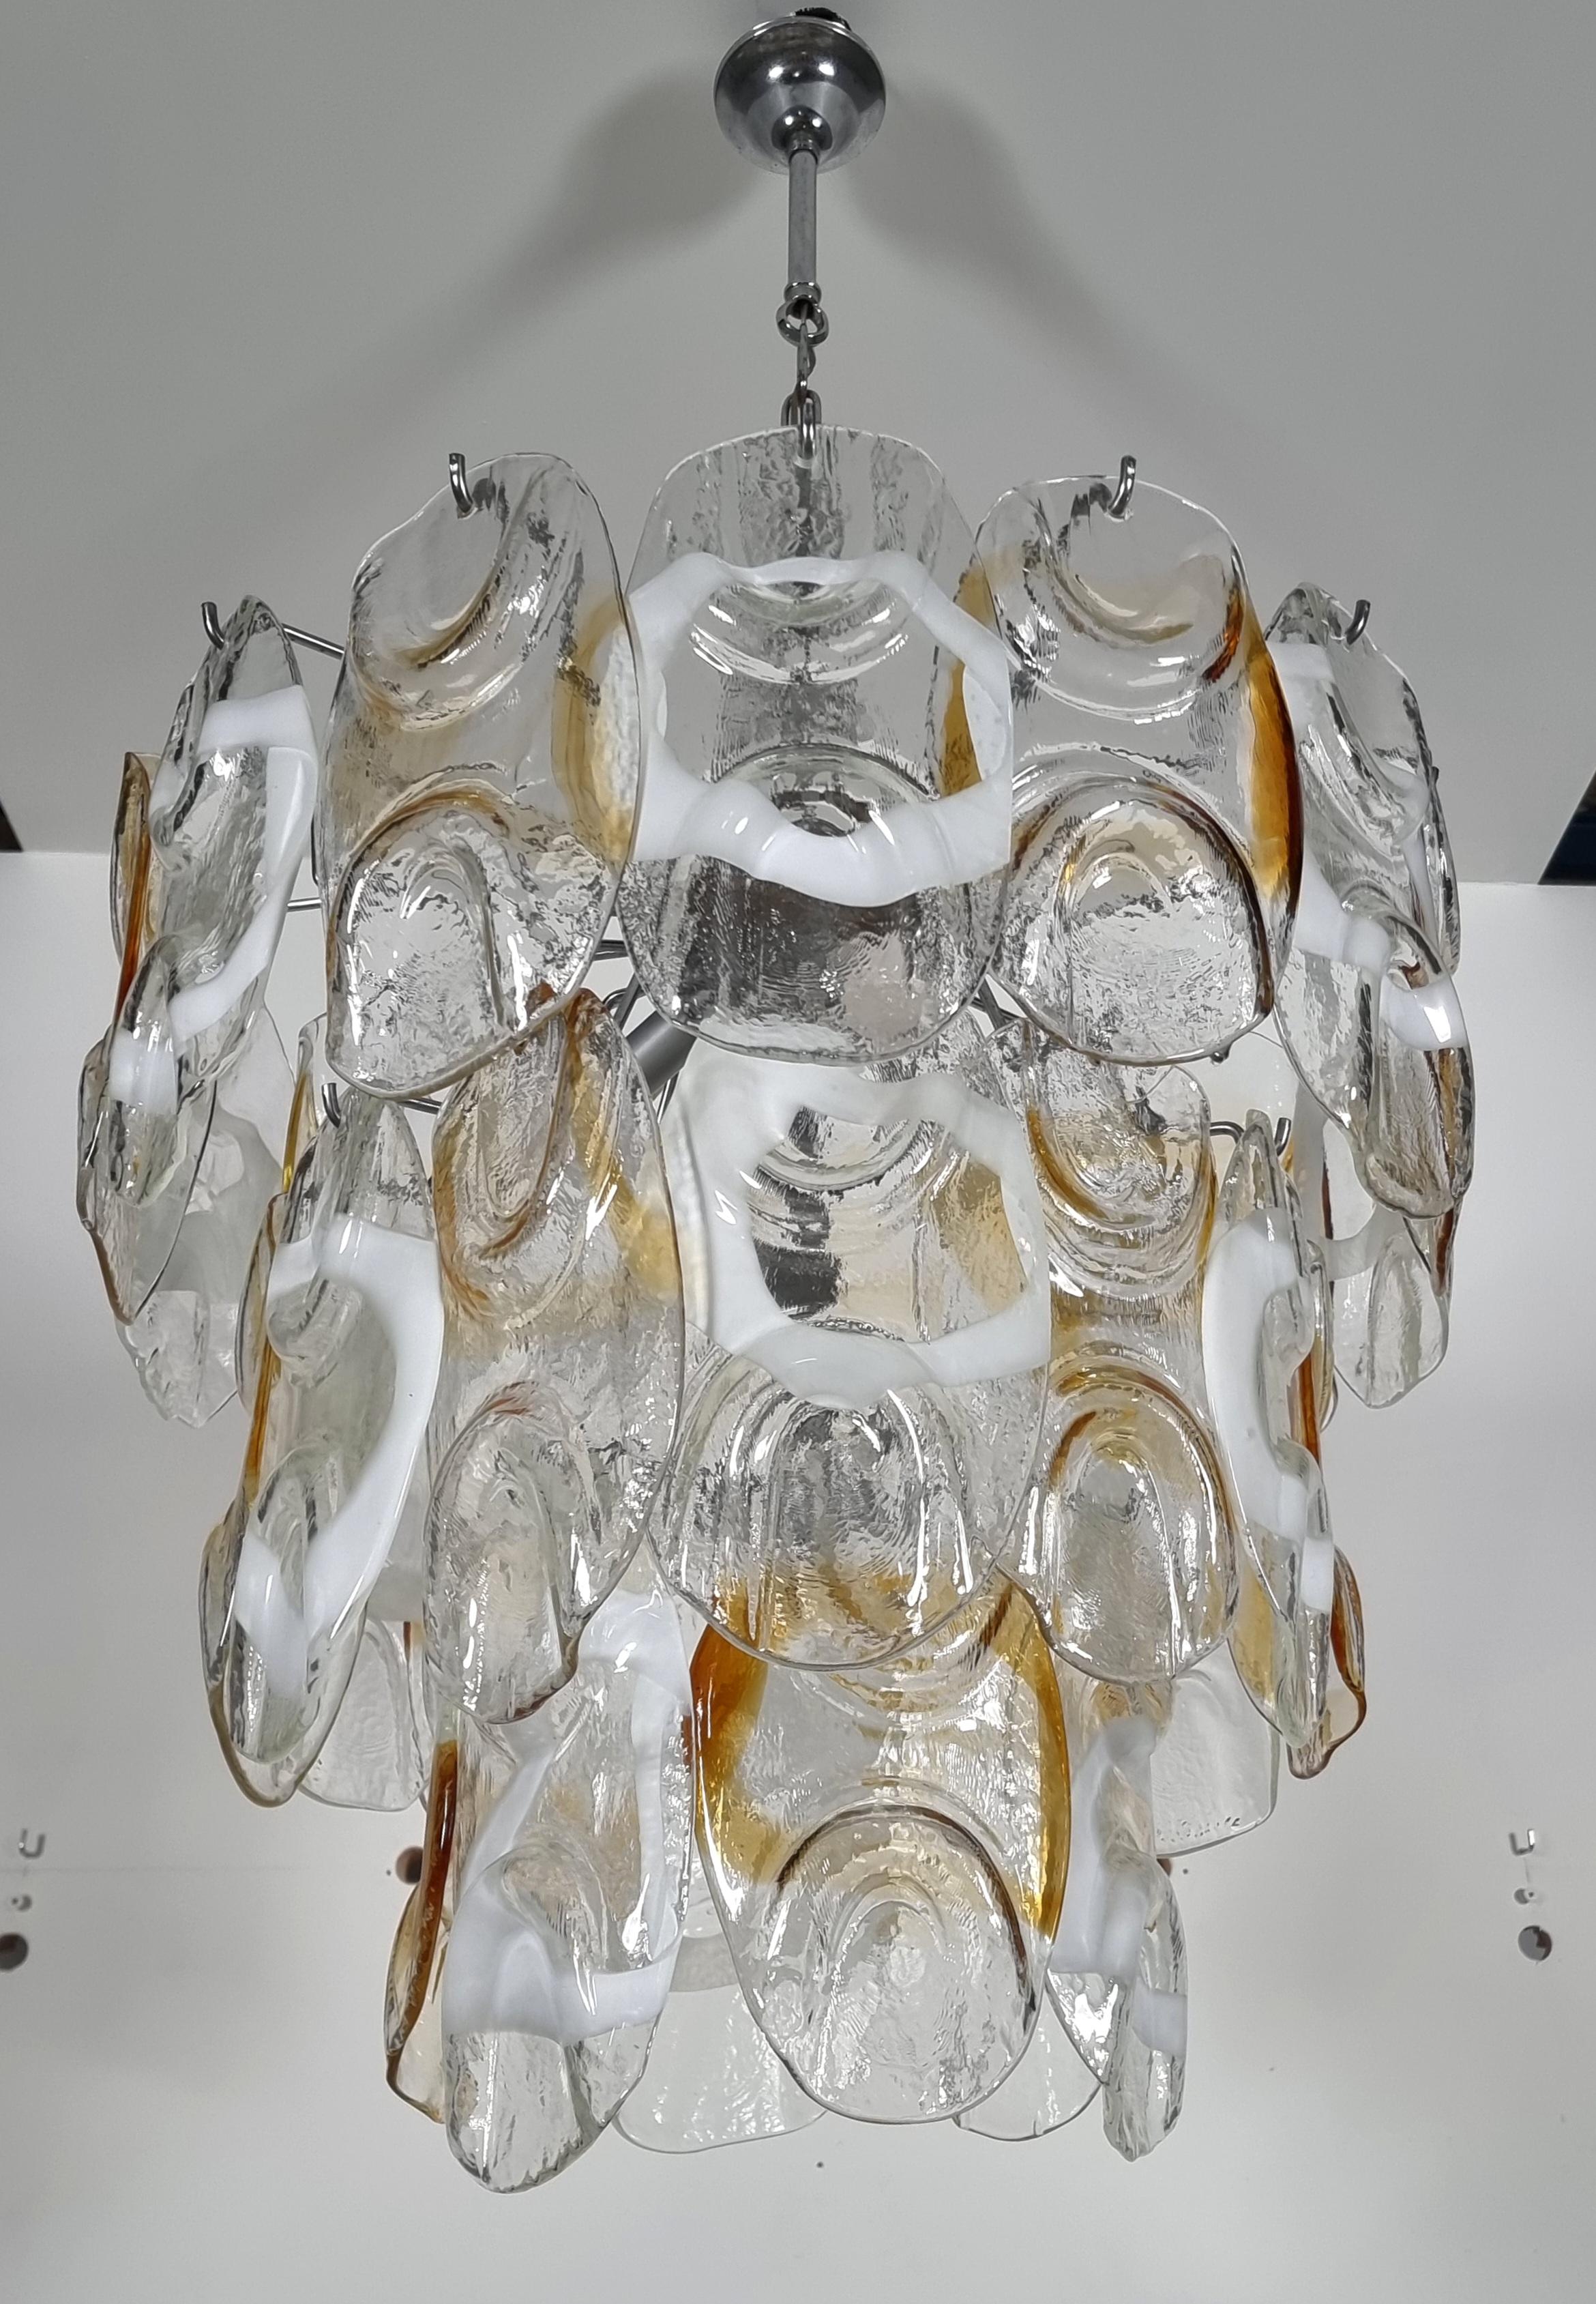 Midcentury Large Murano Glass Chandelier, Italy, 1970s For Sale 5